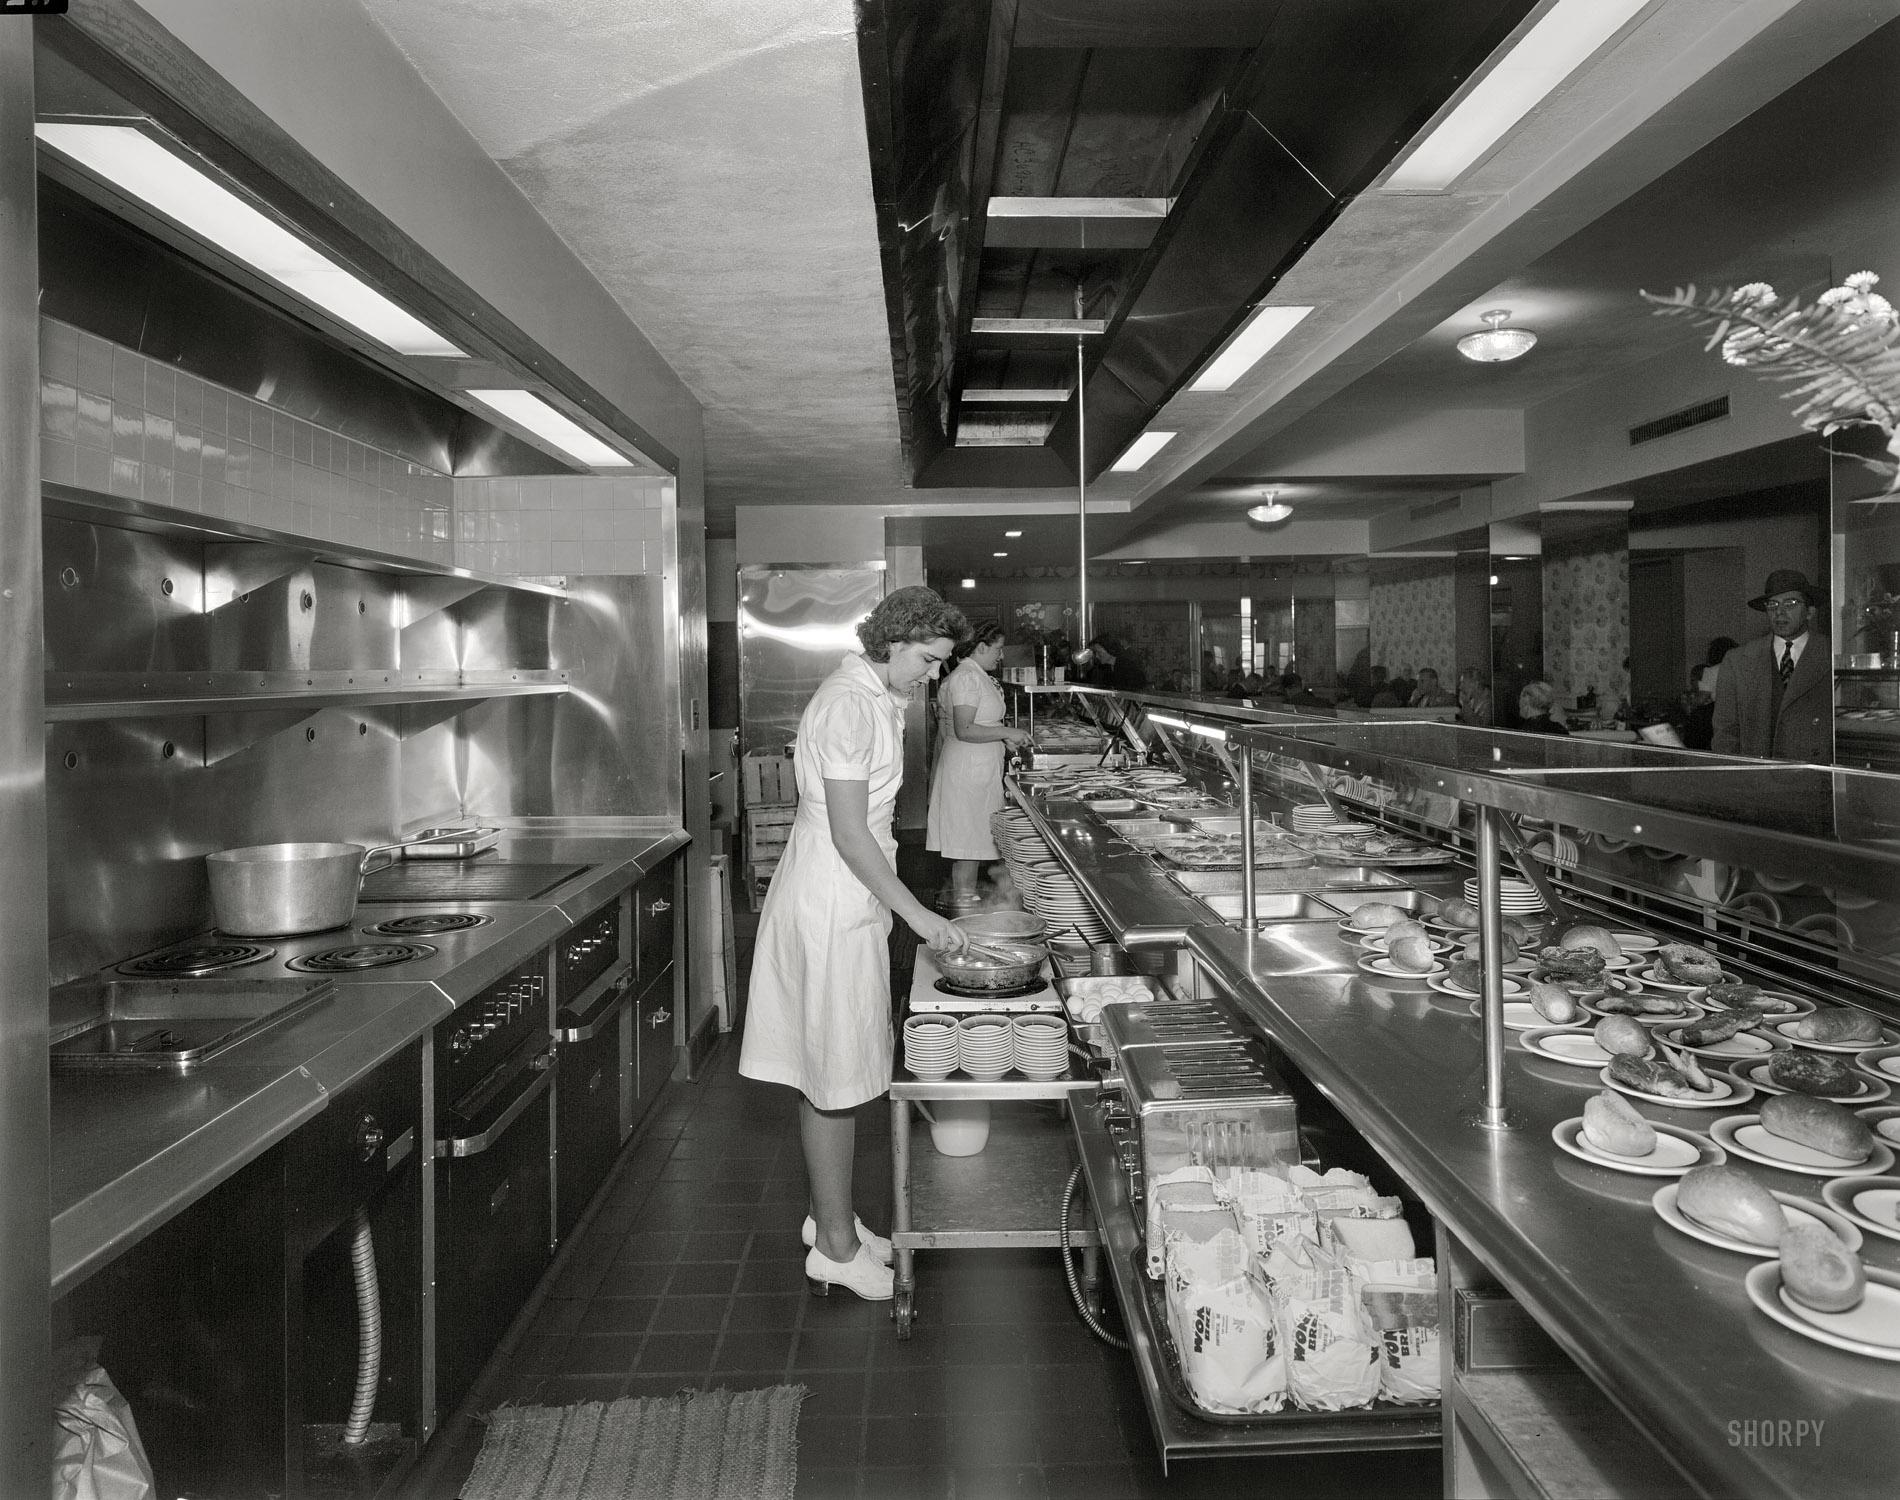 December 3, 1946. Washington, D.C. "Potomac Electric Power Co. -- commercial kitchens, restaurants and lighting. Sholl's Georgian Cafeteria, 3027 14th Street N.W." 8x10 safety negative by Theodor Horydczak. View full size.